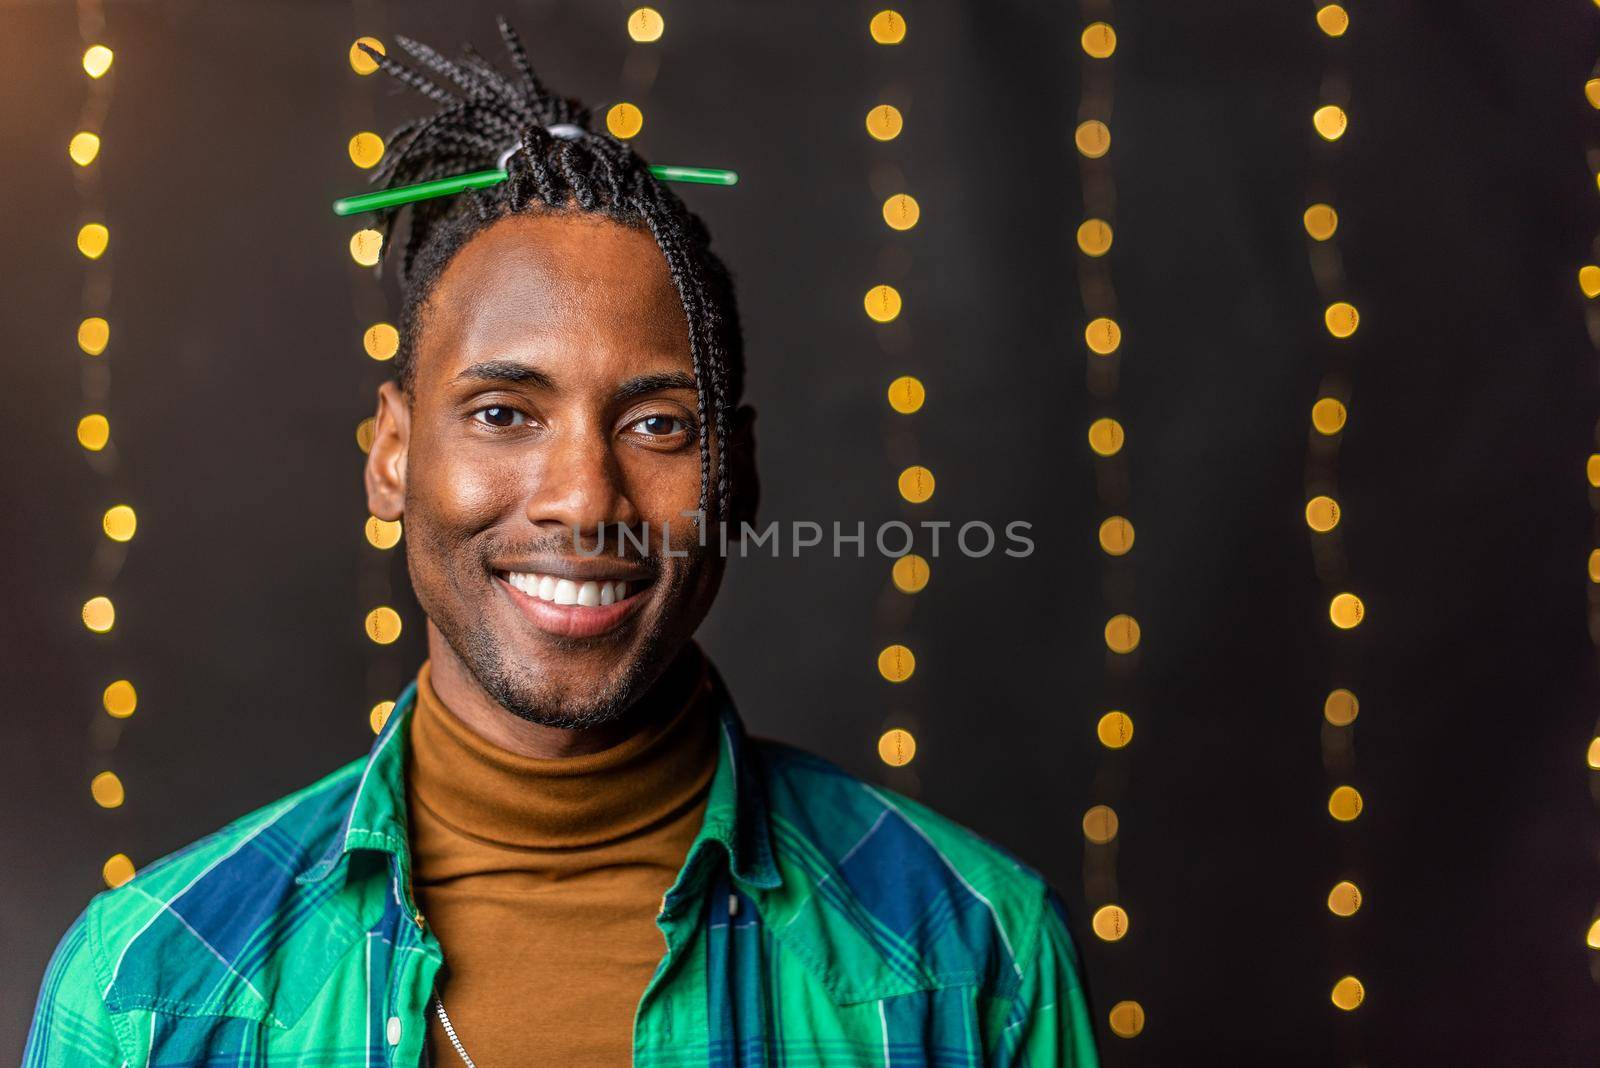 Portrait of a happy young African American with braids looking at the camera with a blurred light background.